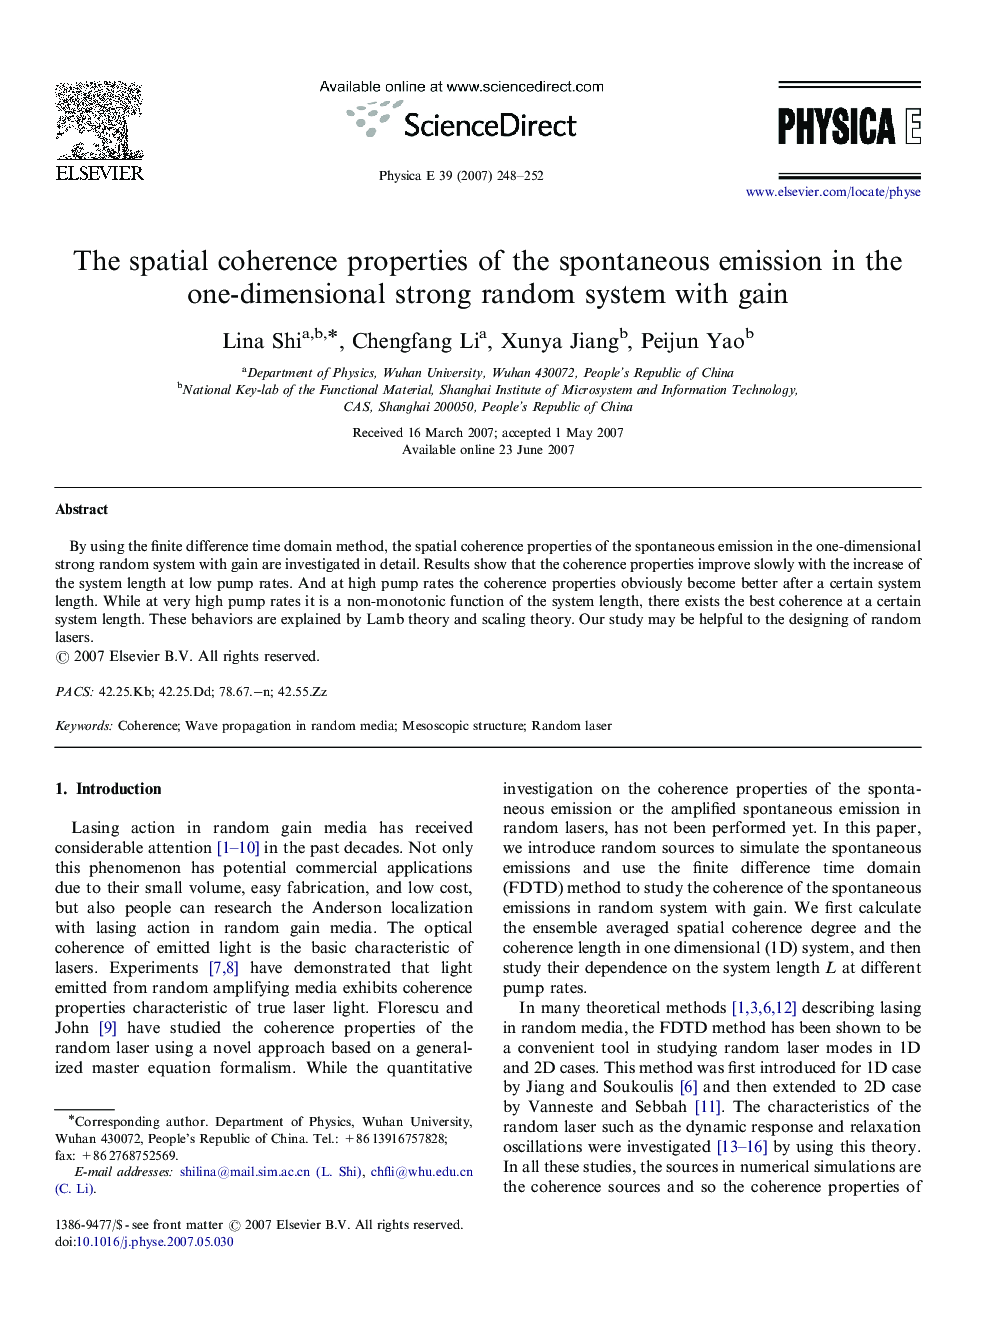 The spatial coherence properties of the spontaneous emission in the one-dimensional strong random system with gain